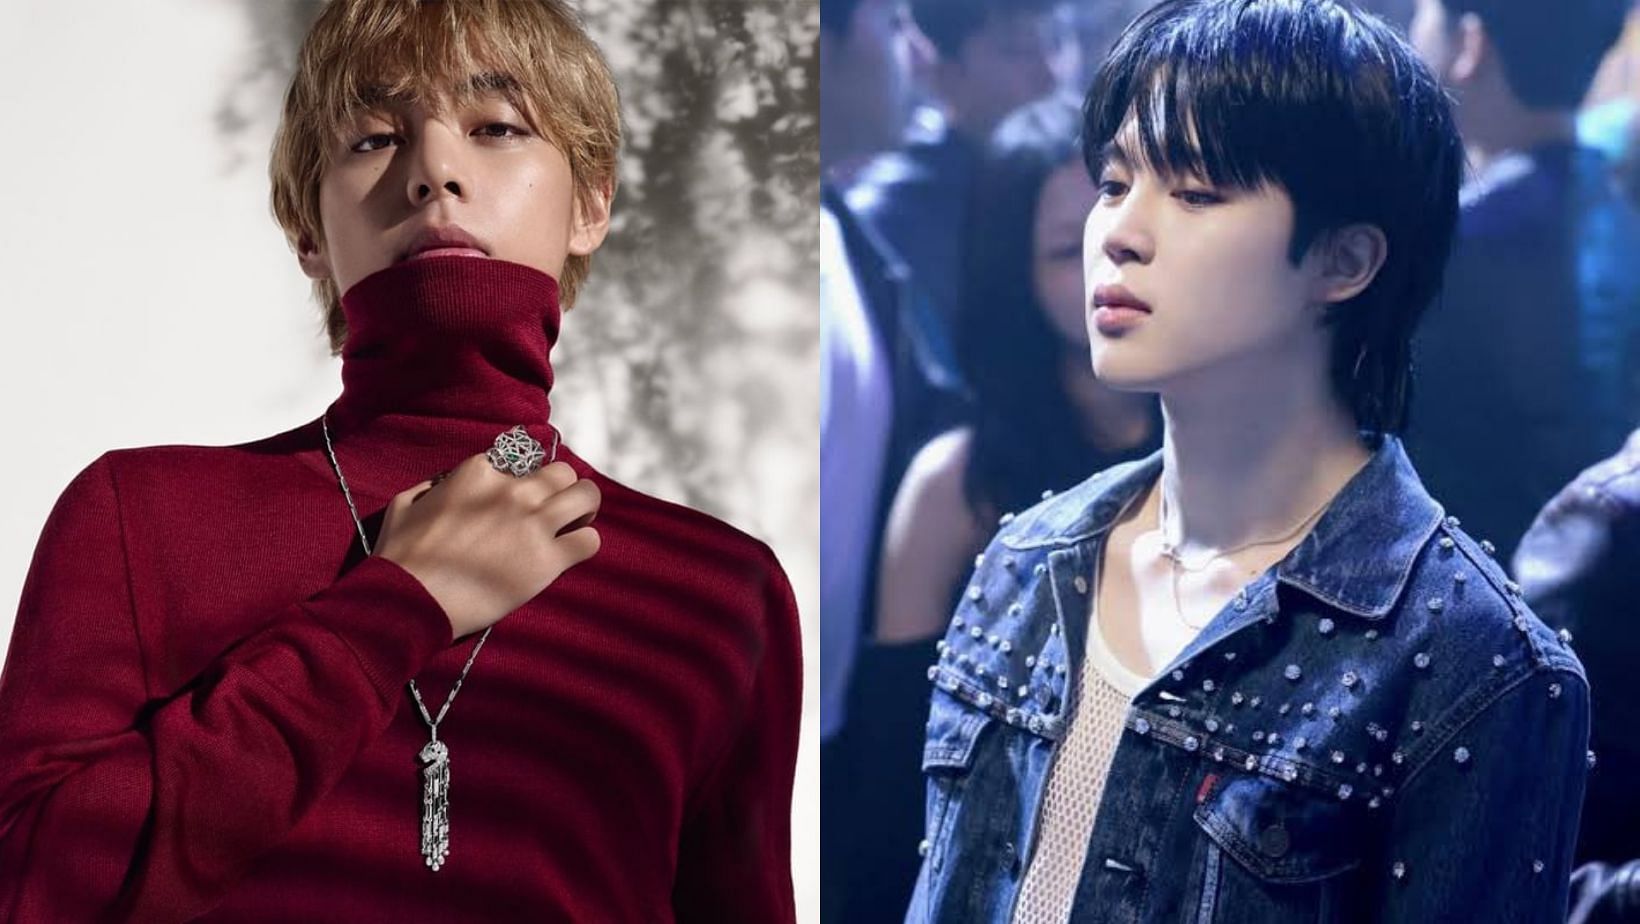 BTS V's (Kim Taehyung) solo debut album Layover surpasses 100 Million  Streams on Spotify before the album release